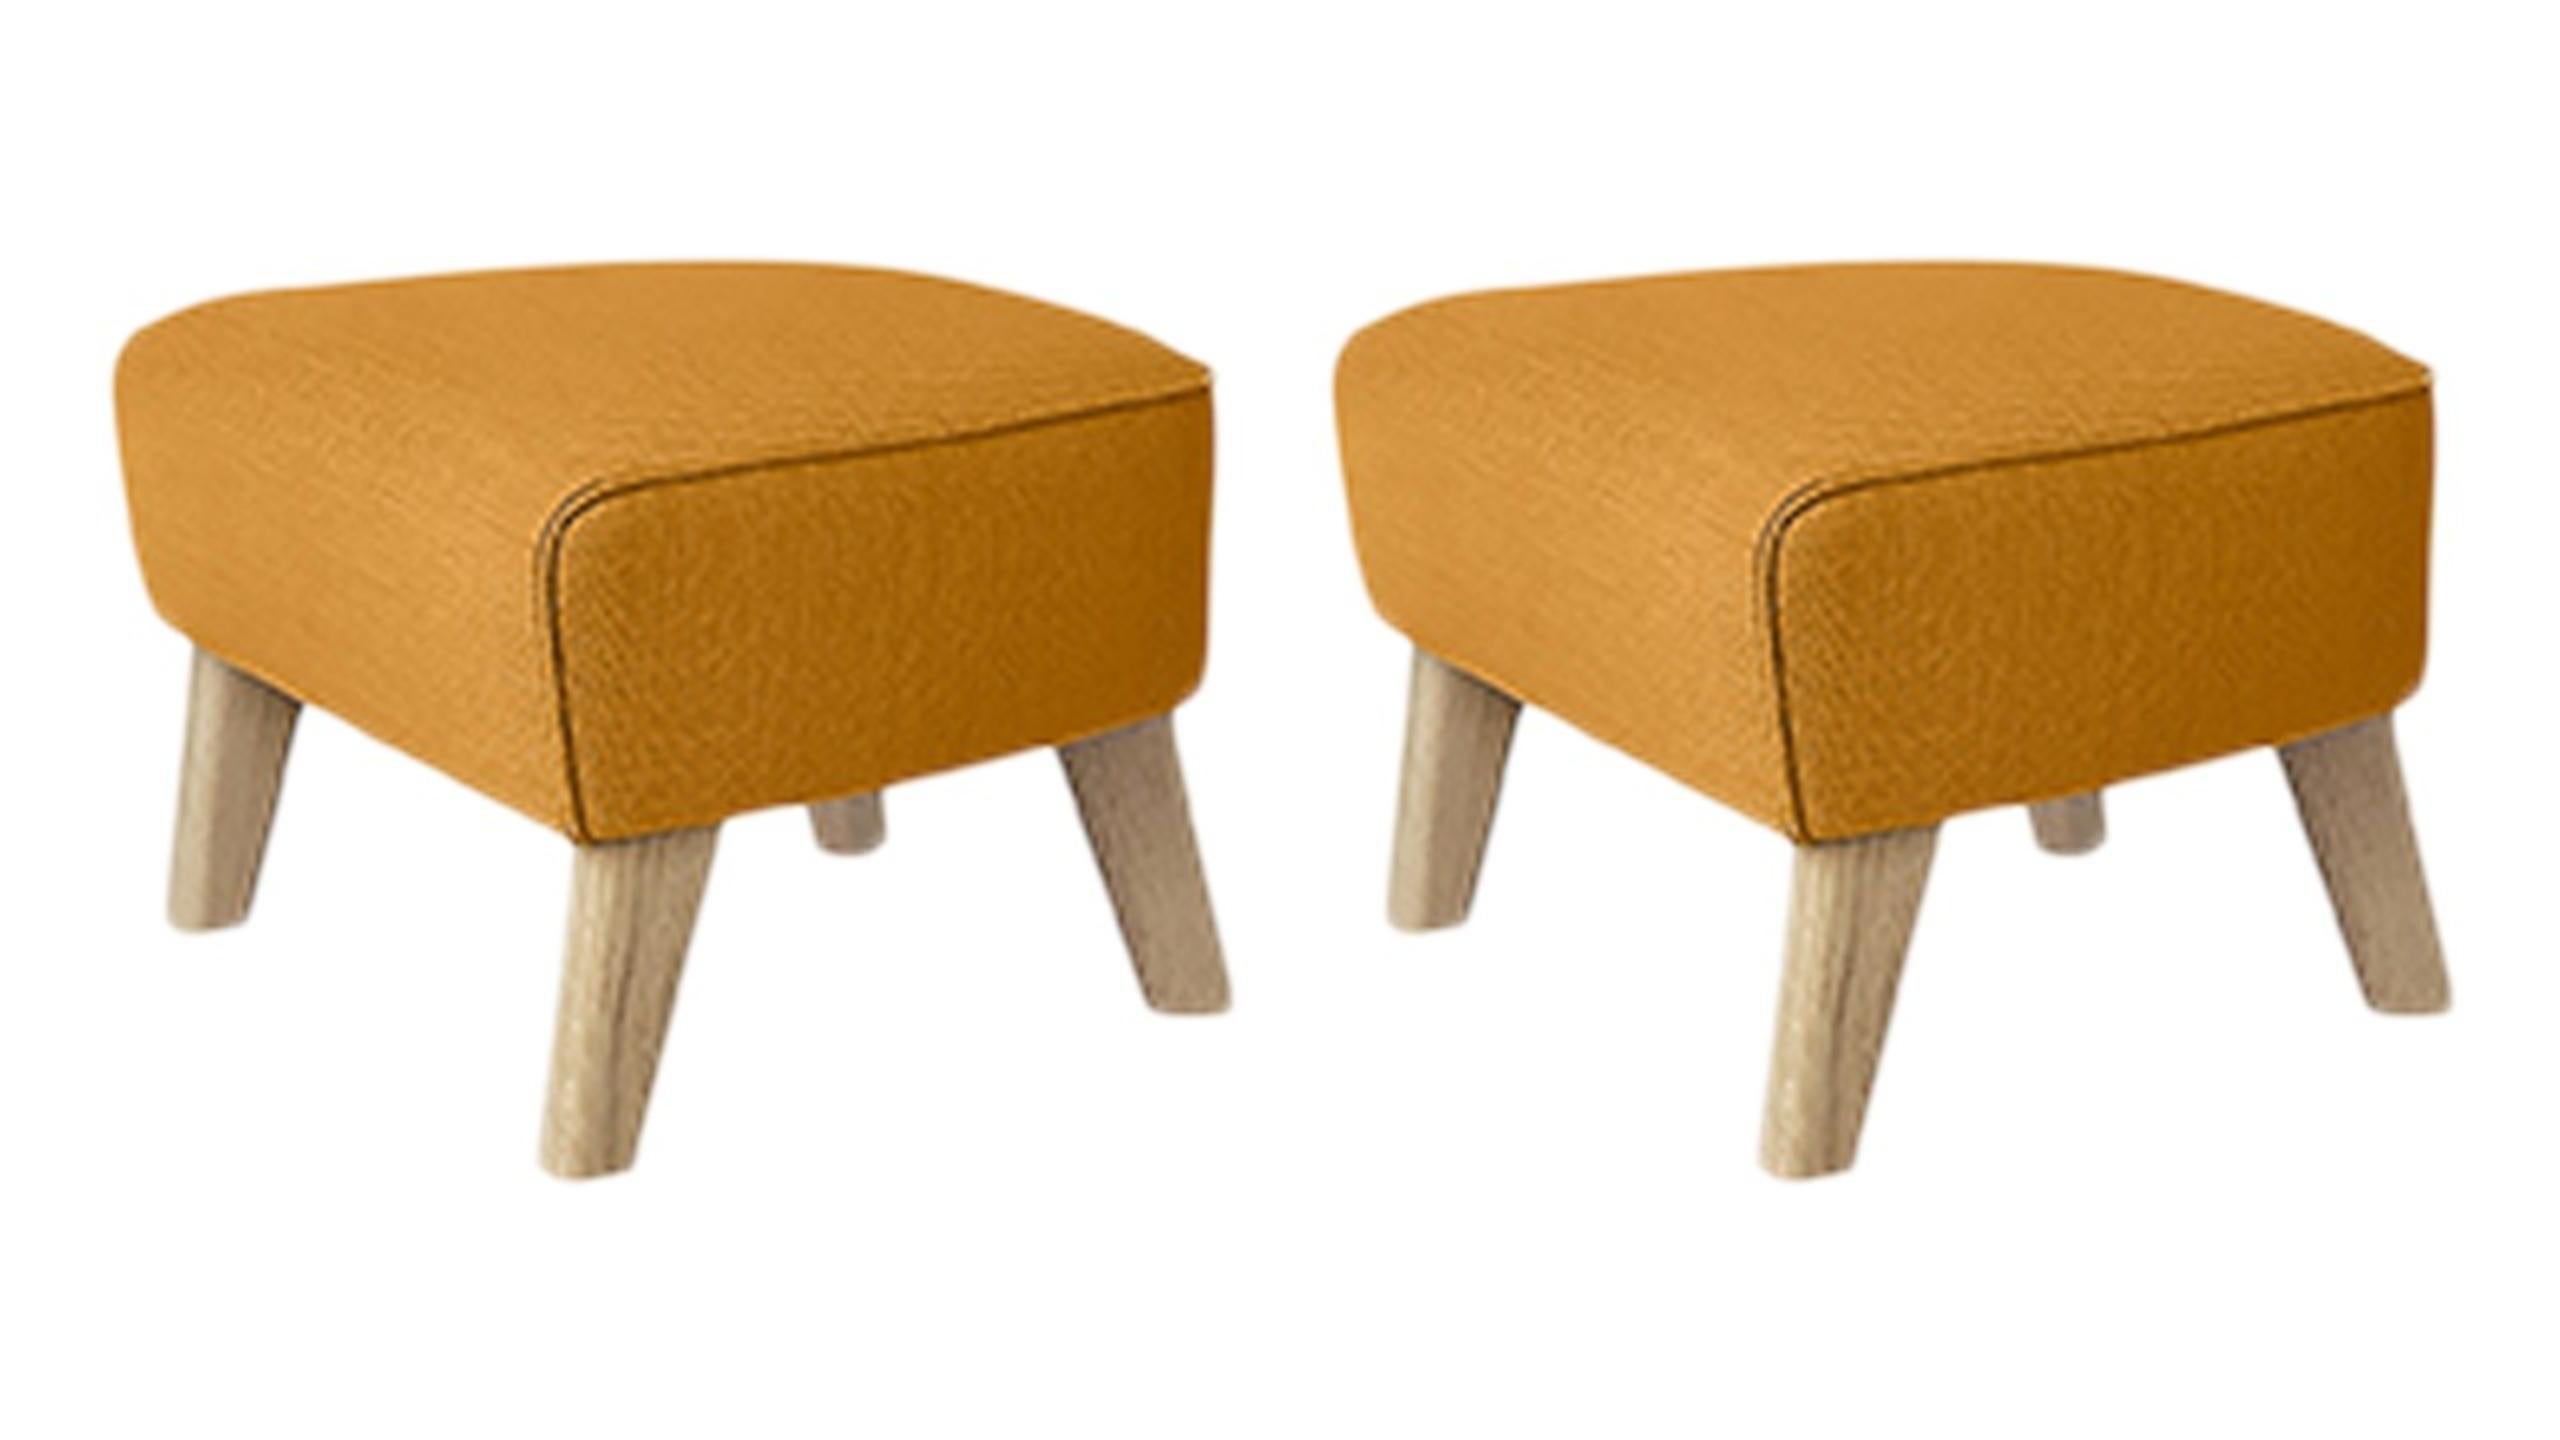 Set of 2 orange, natural oak Raf Simons Vidar 3 my own chair footstool by Lassen
Dimensions: W 56 x D 58 x H 40 cm 
Materials: Textile
Also available: Other colors available

The my own chair footstool has been designed in the same spirit as